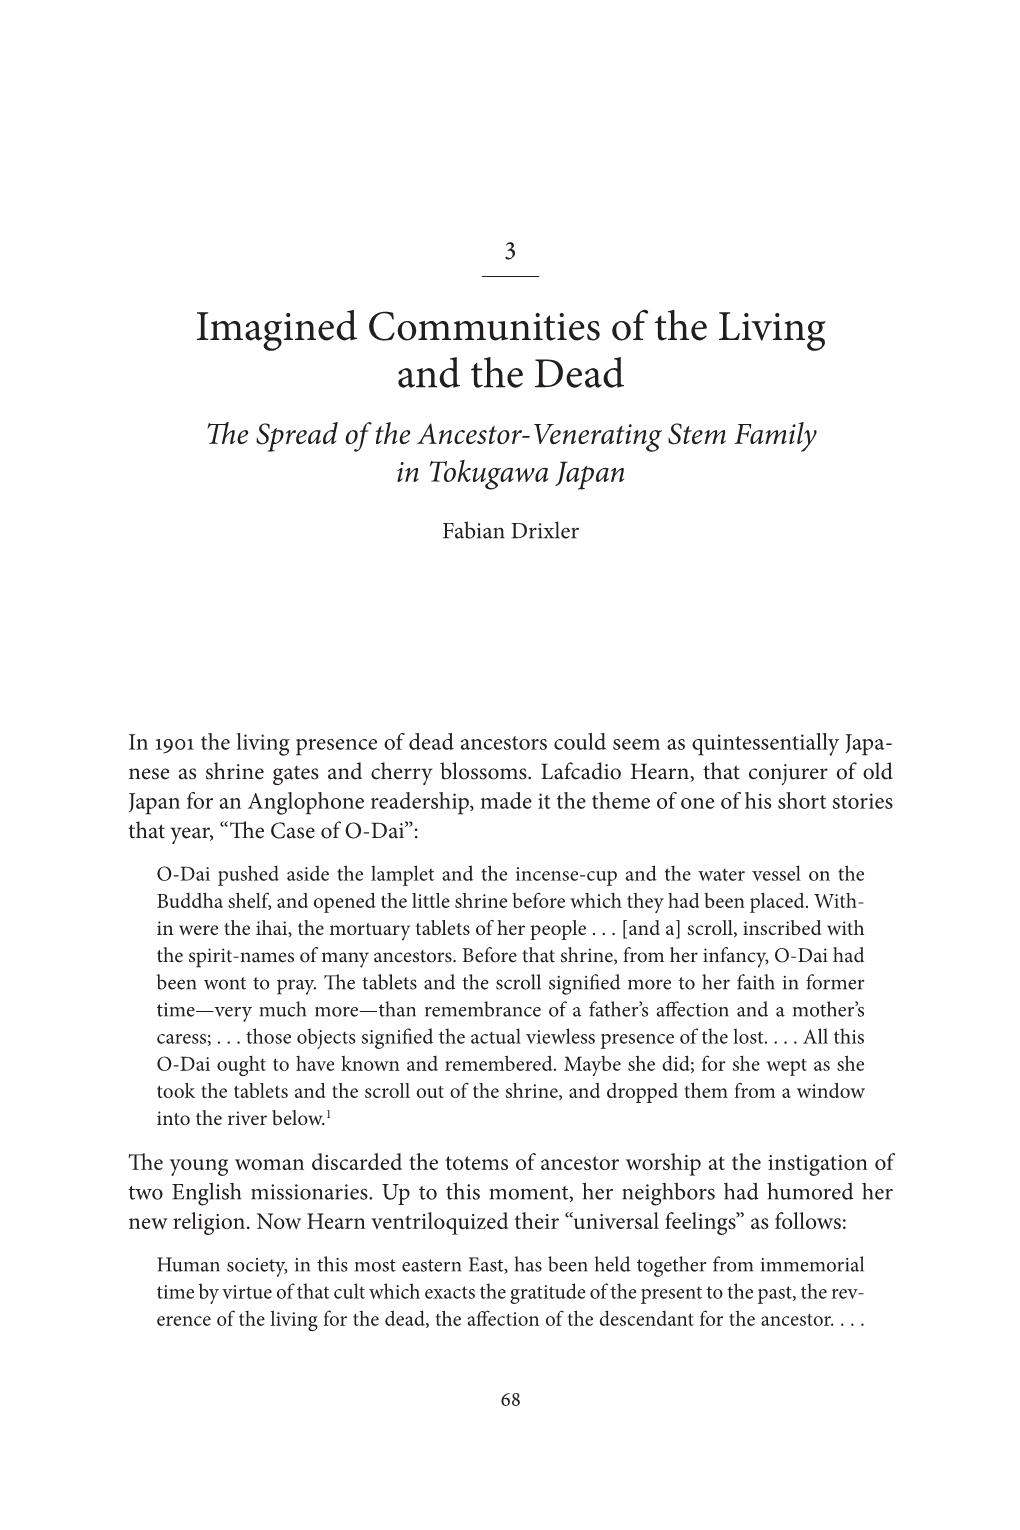 Imagined Communities of the Living and the Dead the Spread of the Ancestor-Venerating Stem Family in Tokugawa Japan